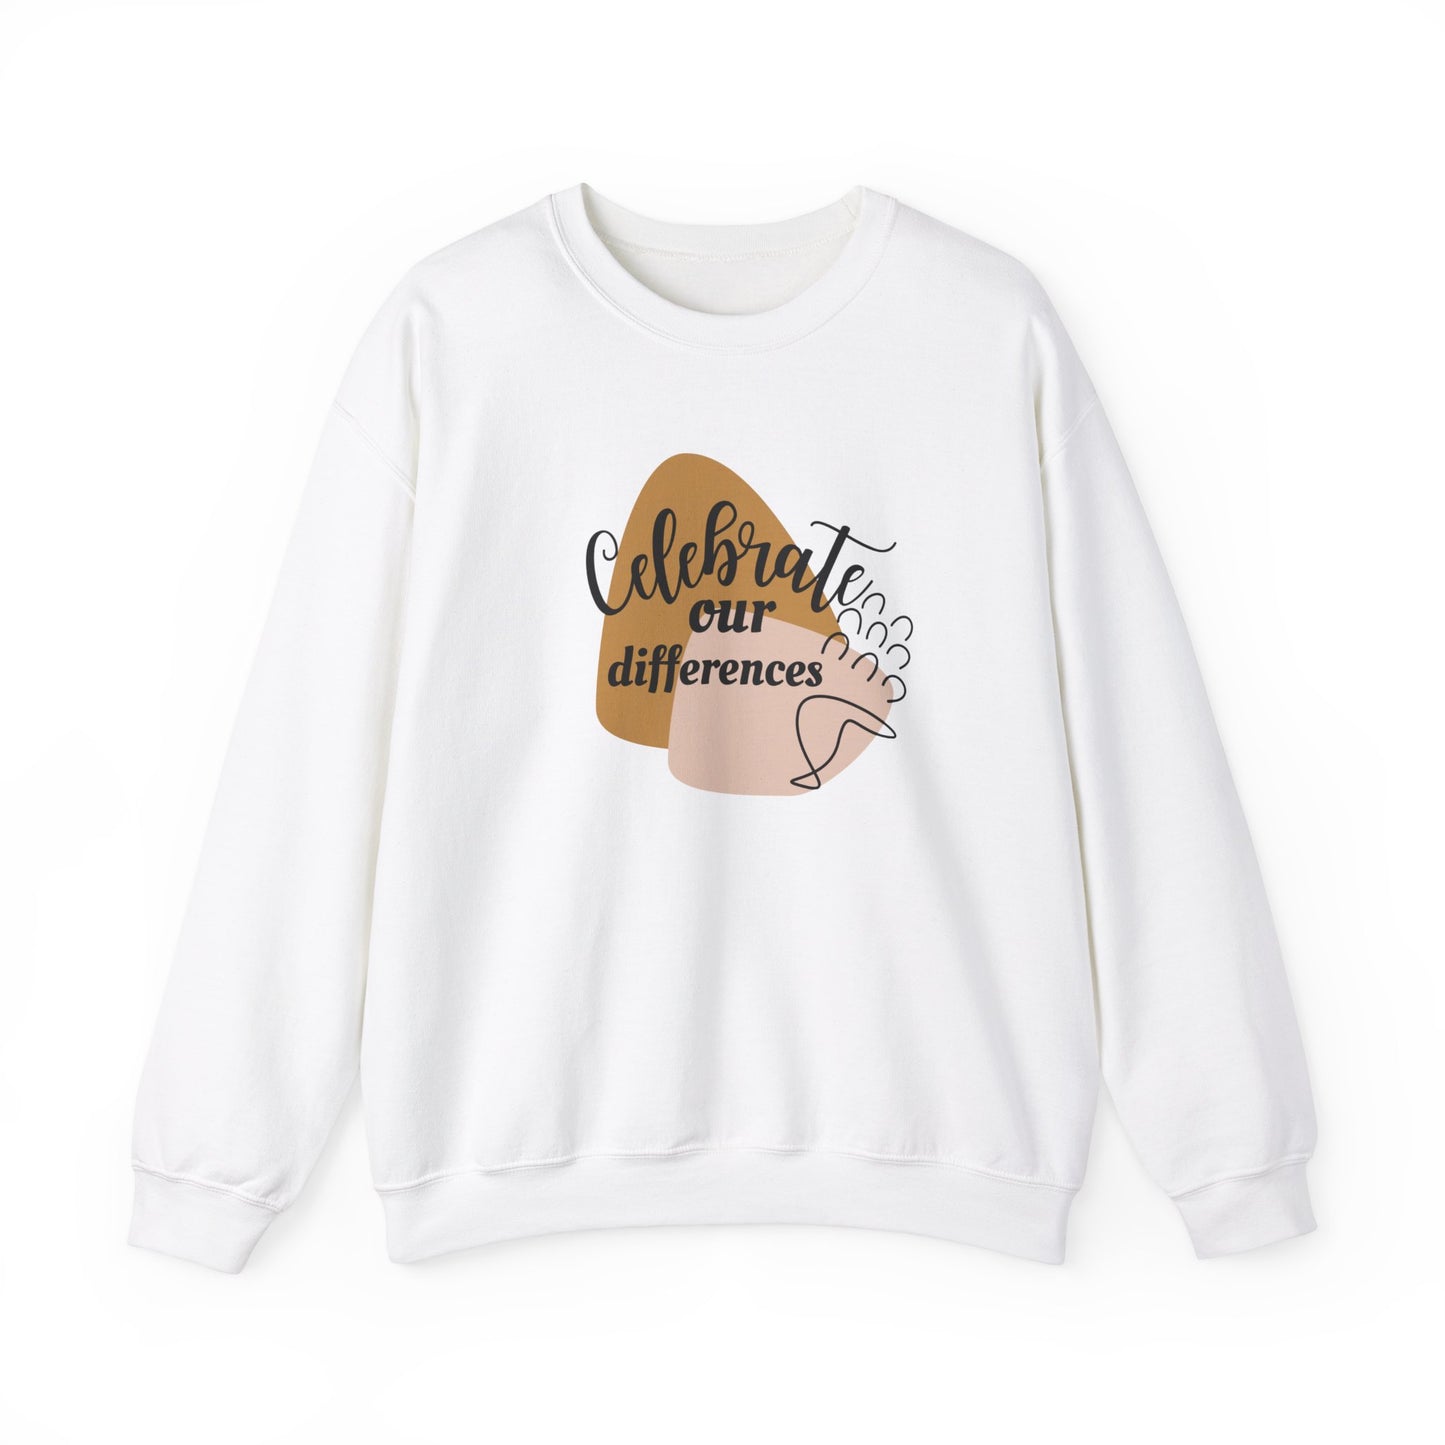 Autism awareness sweatshirt - Celebrate our differences quote - Autism Awareness gift